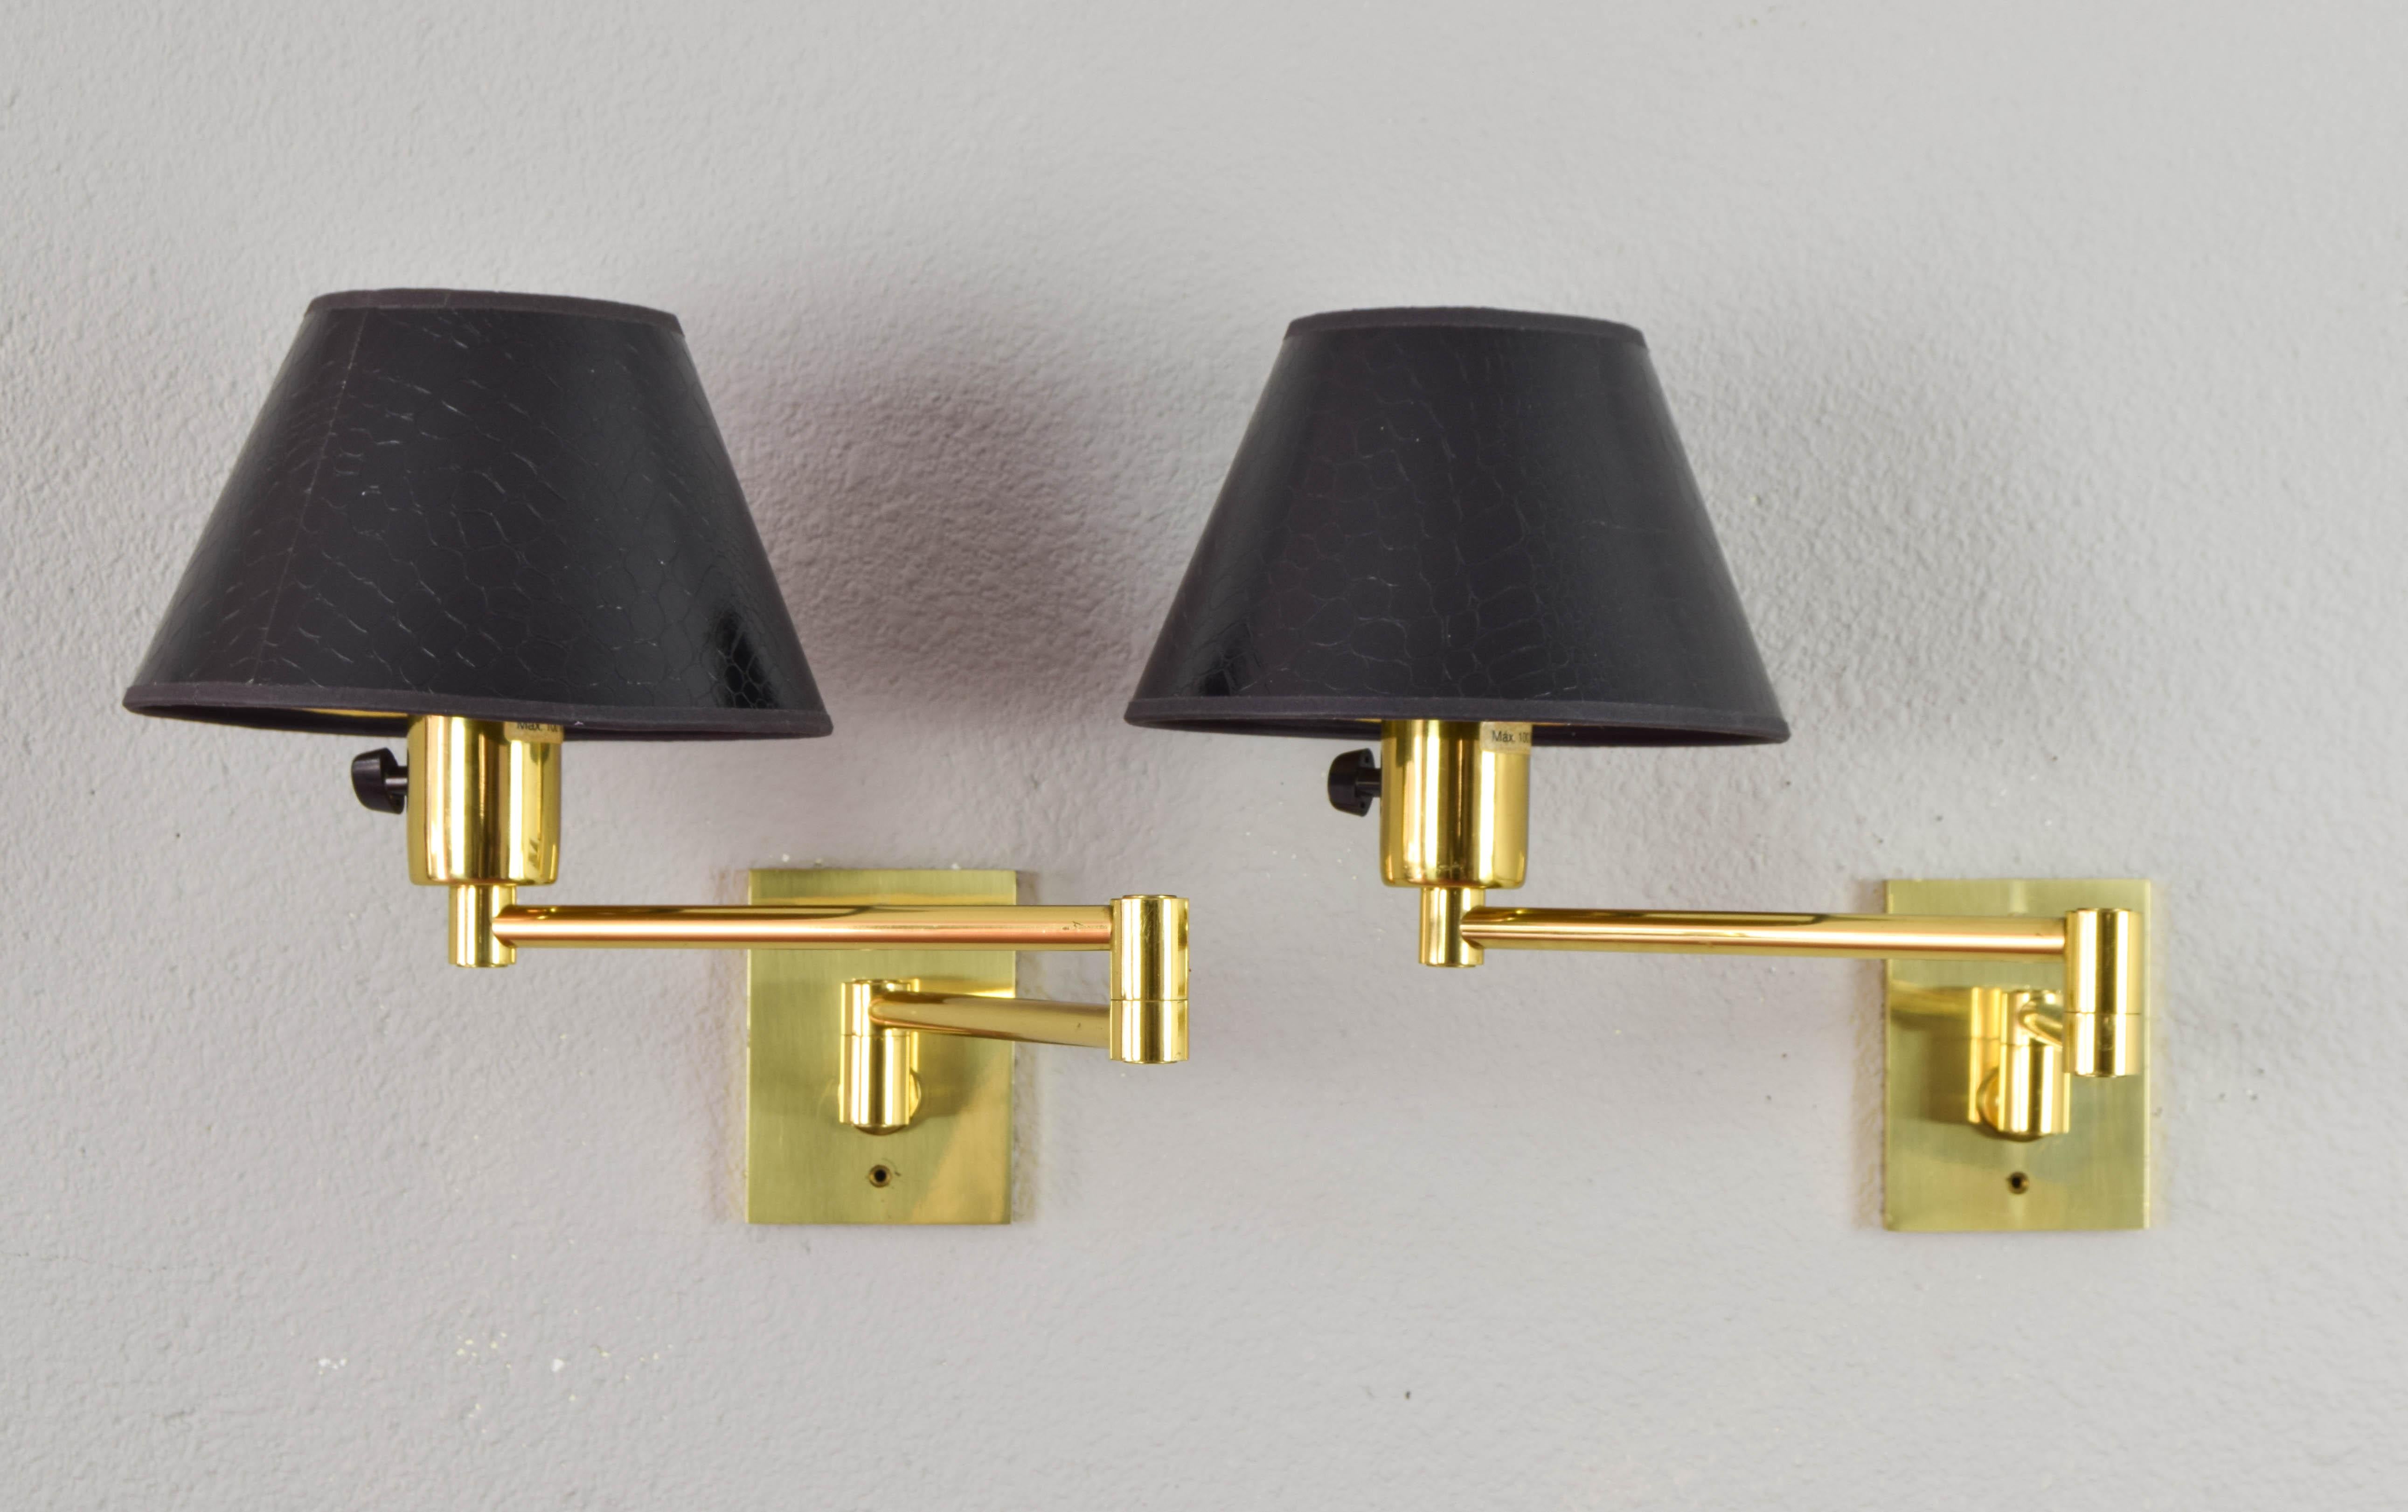 Pair of wall lamps designed by George W. Hansen in the 1960s and produced by the Spanish firm Metalarte with permission from Hansen Lamps New York in the 1970s. Brass structure and articulated arm.

Measurements:
Depth 54 cm
Length of each arm